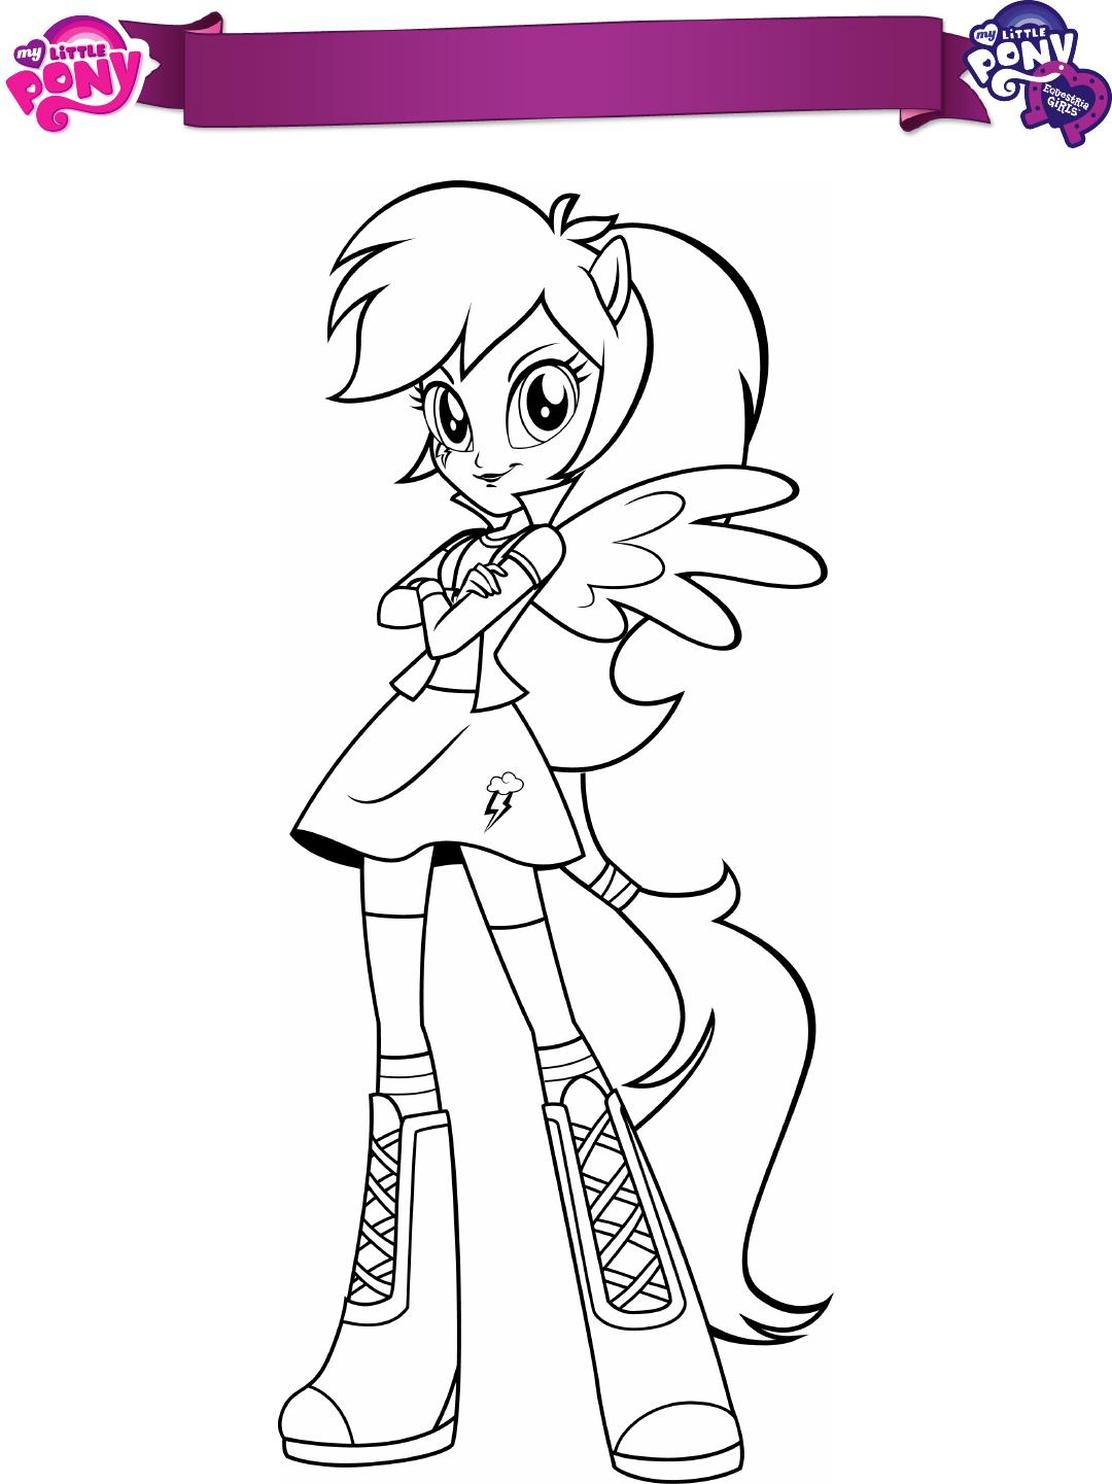 20+ Free Printable Equestria Girls Coloring Pages - EverFreeColoring.com